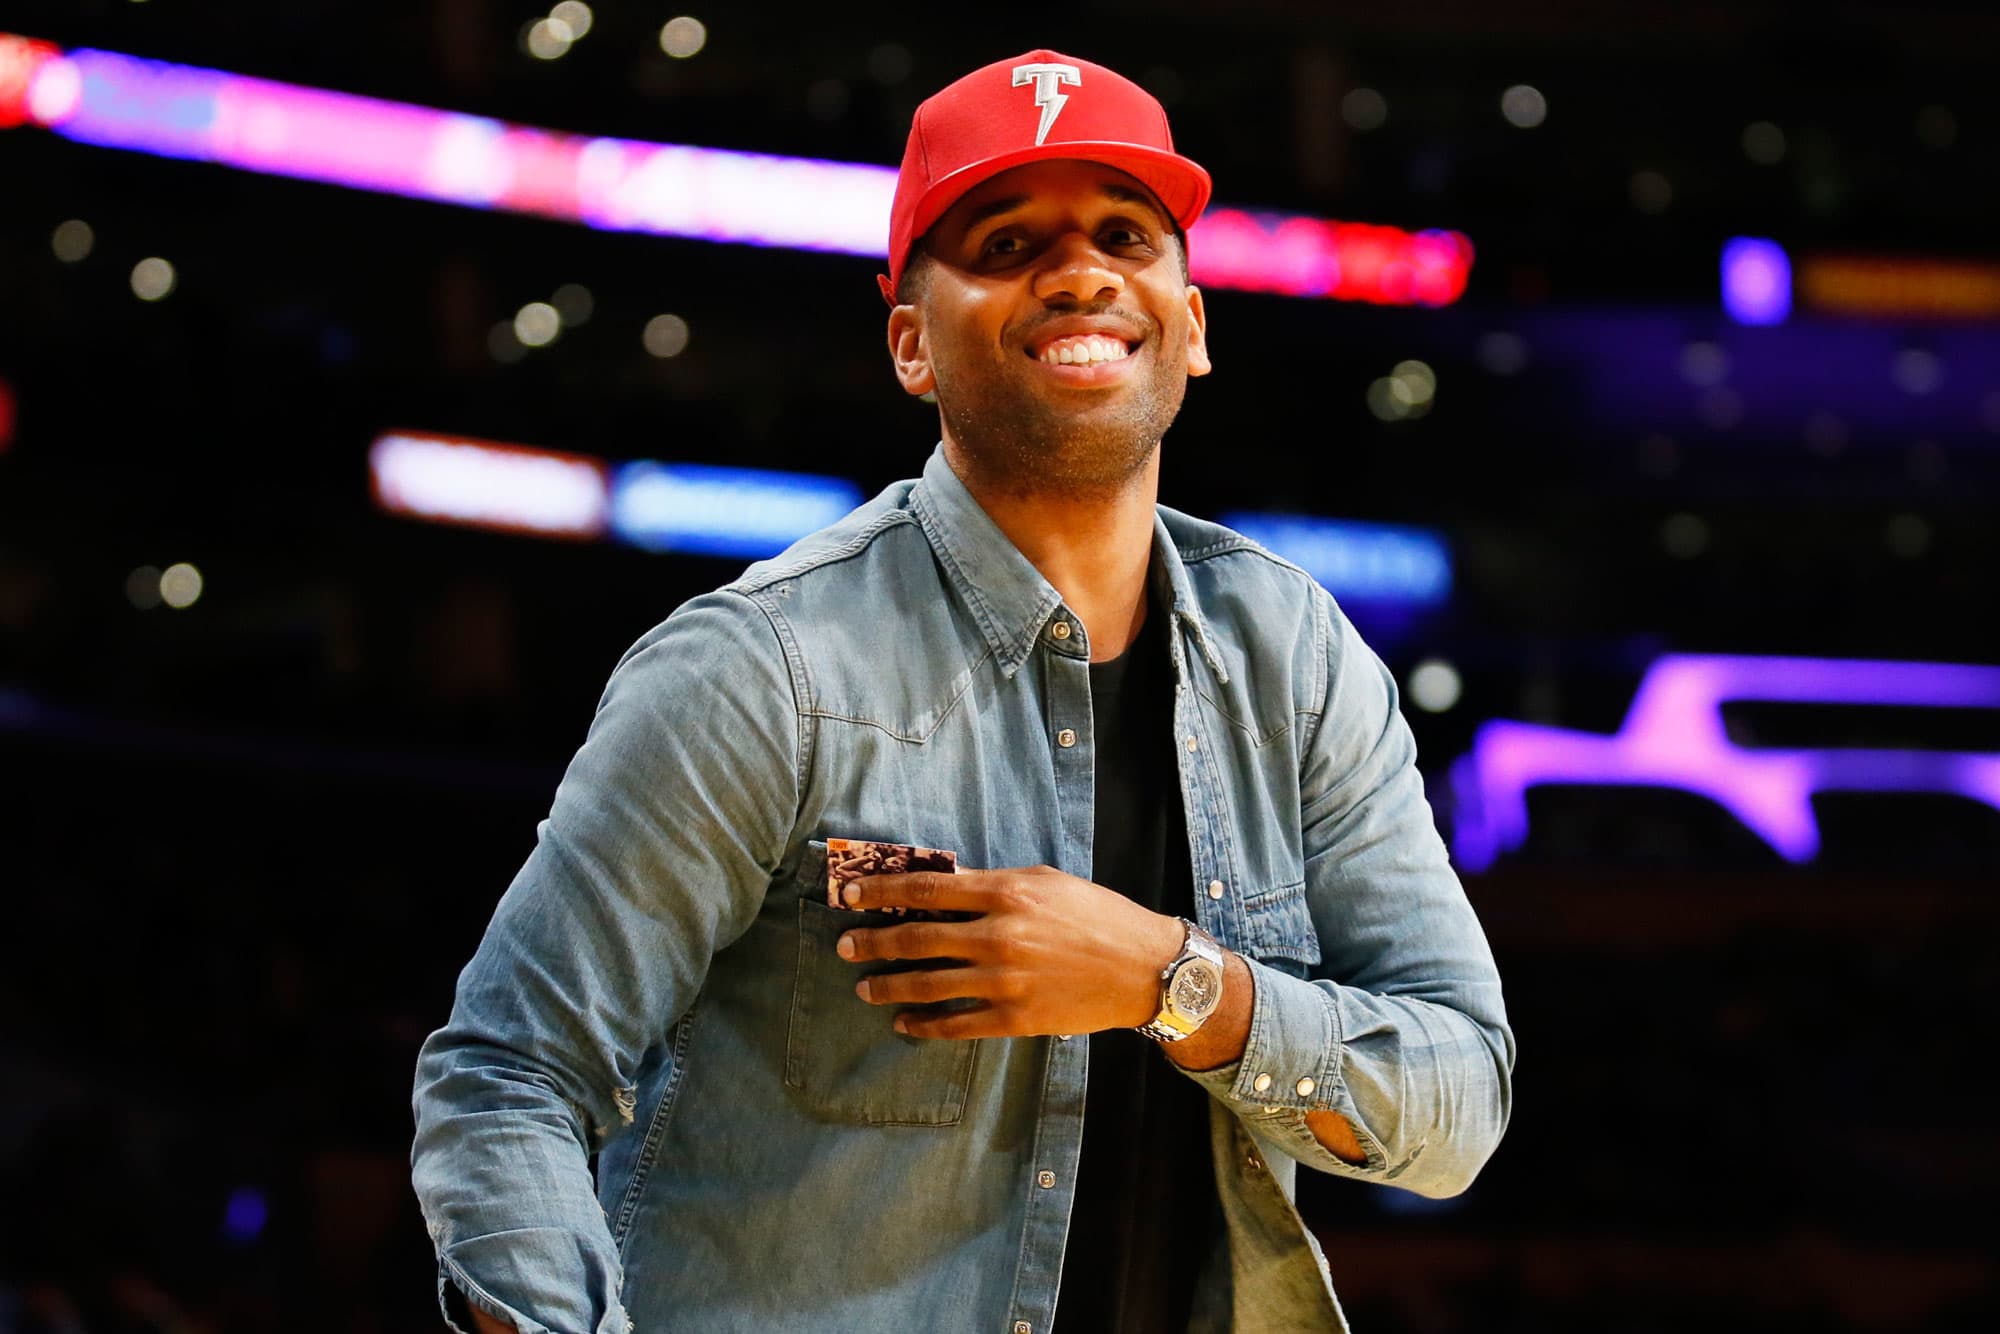 Cleveland Cavaliers' LeBron James' business manager Maverick Carter attends the NBA basketball game between the Los Angeles Lakers and Cleveland Cavaliers Thursday, March 10, 2016, in Los Angeles.